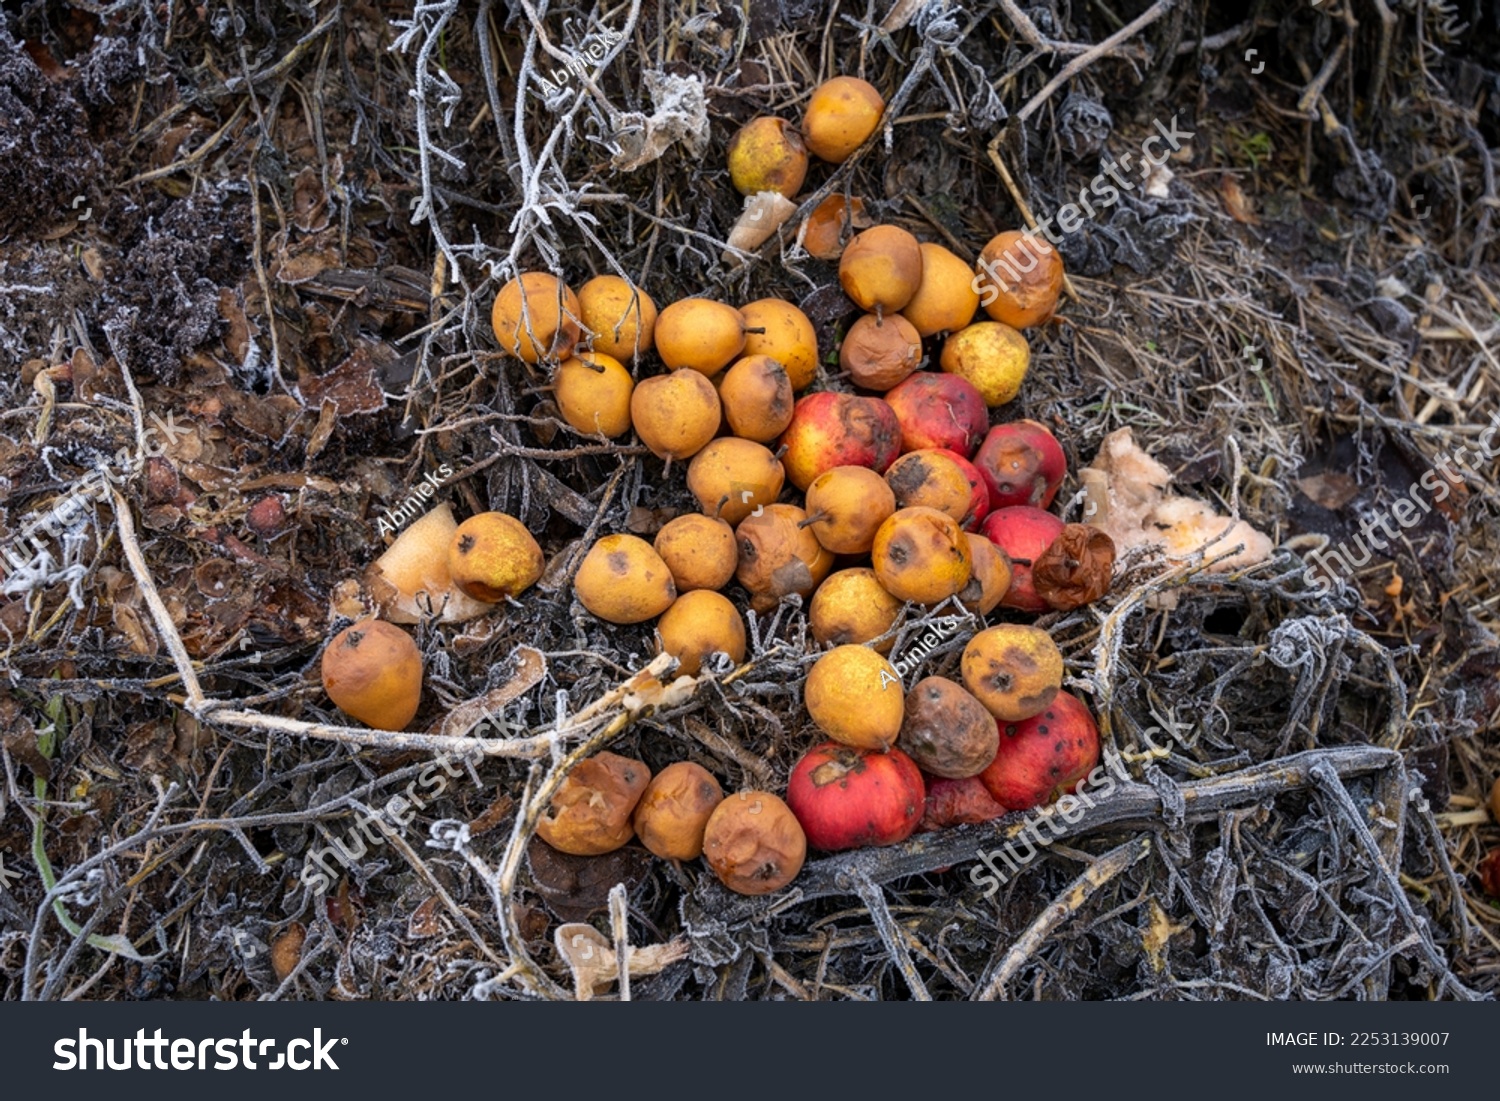 Rotten pears and apples in compost pile #2253139007